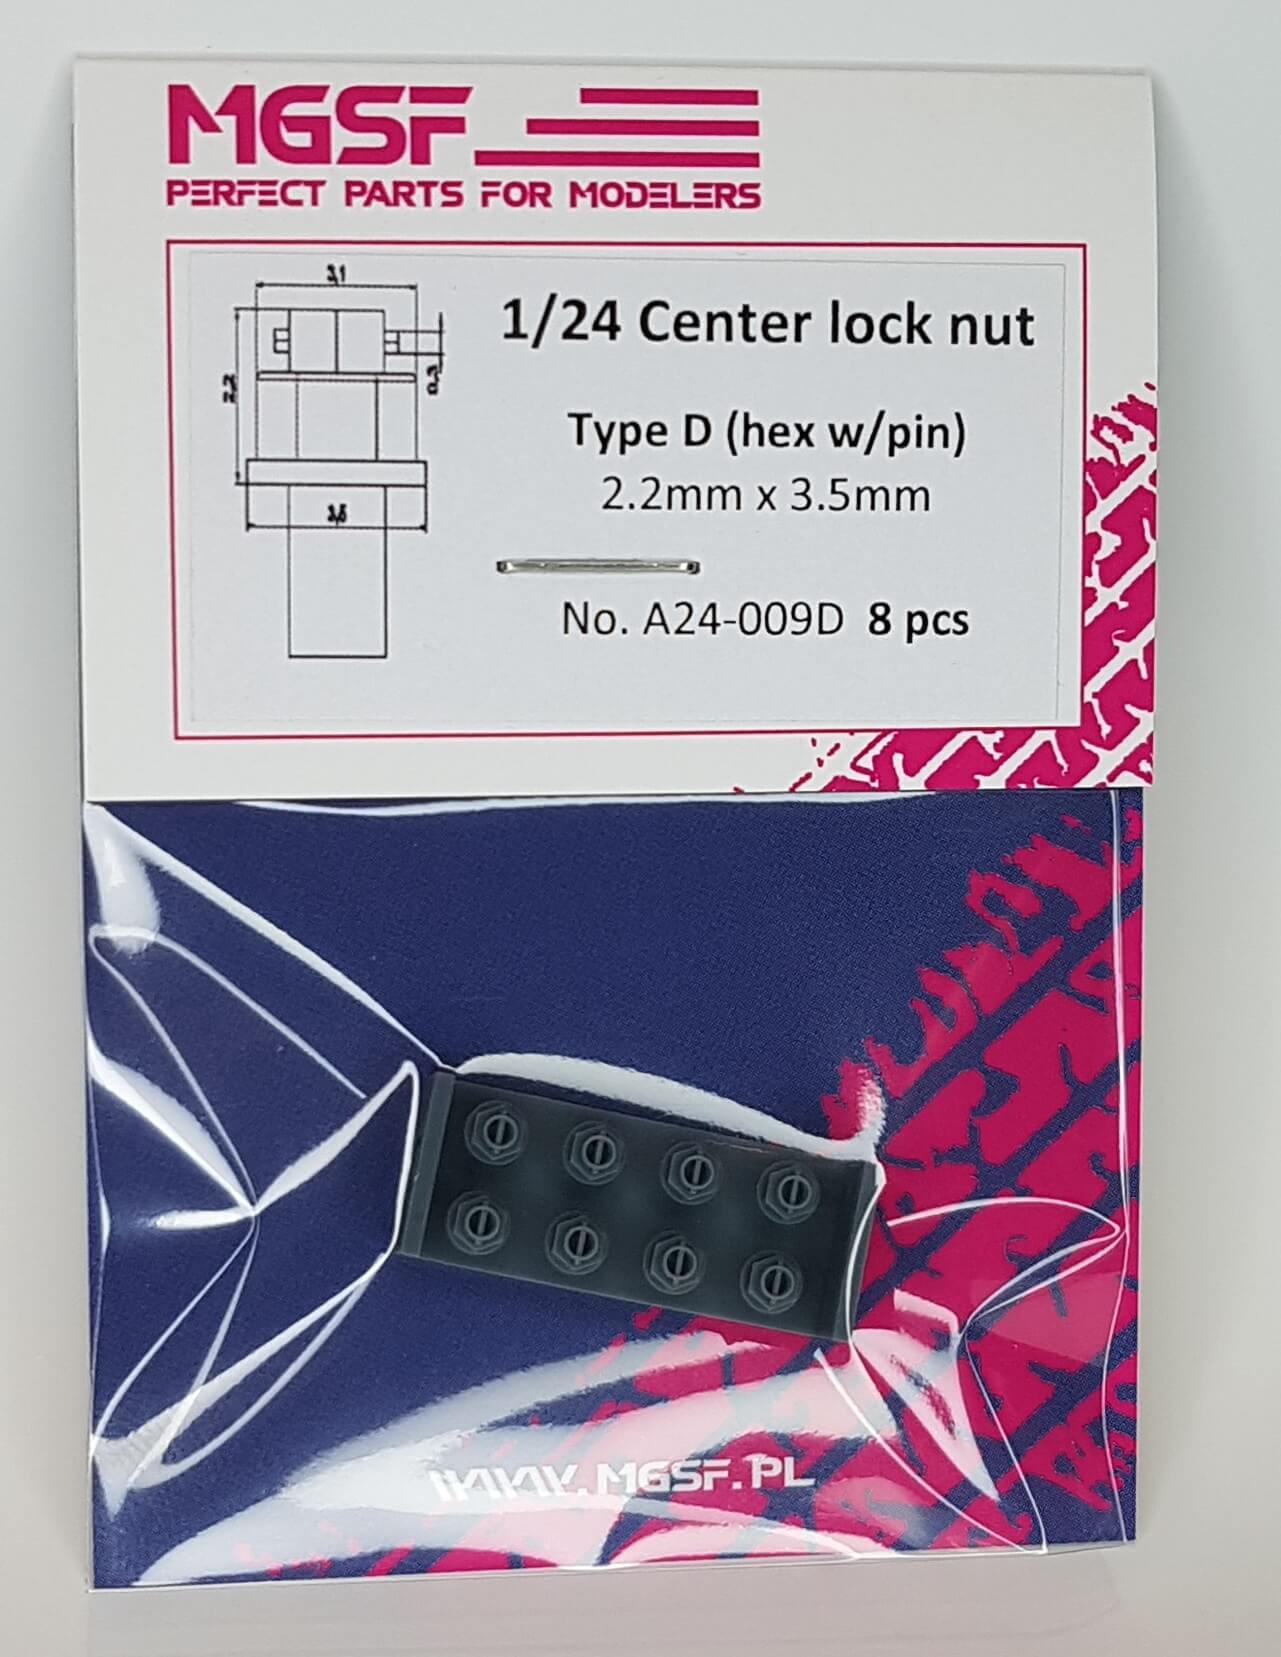 MGSF 1/24 Center lock nut - hex with pin